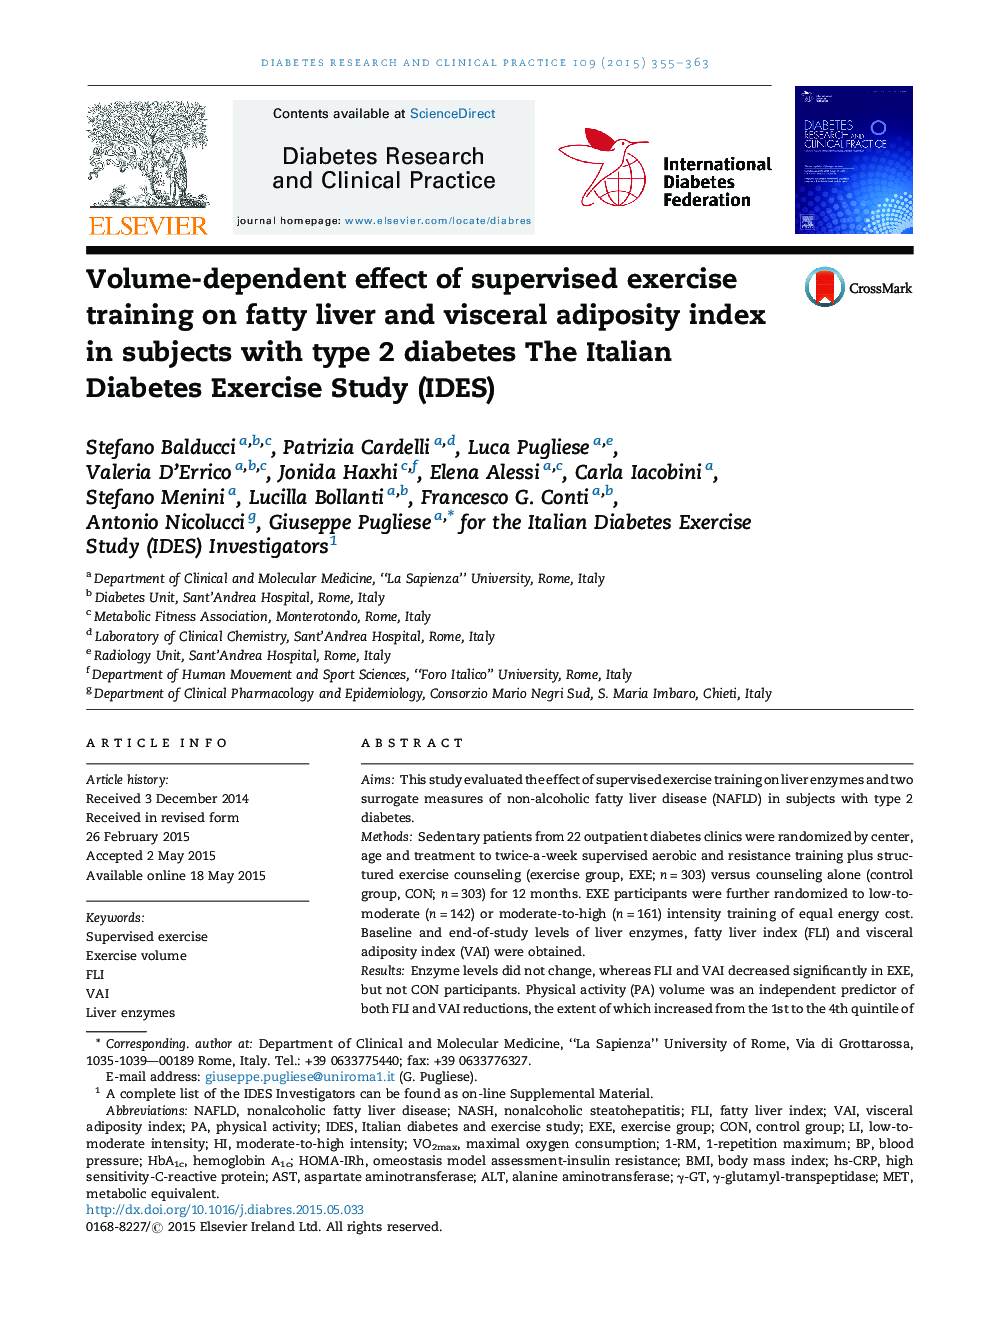 Volume-dependent effect of supervised exercise training on fatty liver and visceral adiposity index in subjects with type 2 diabetes The Italian Diabetes Exercise Study (IDES)